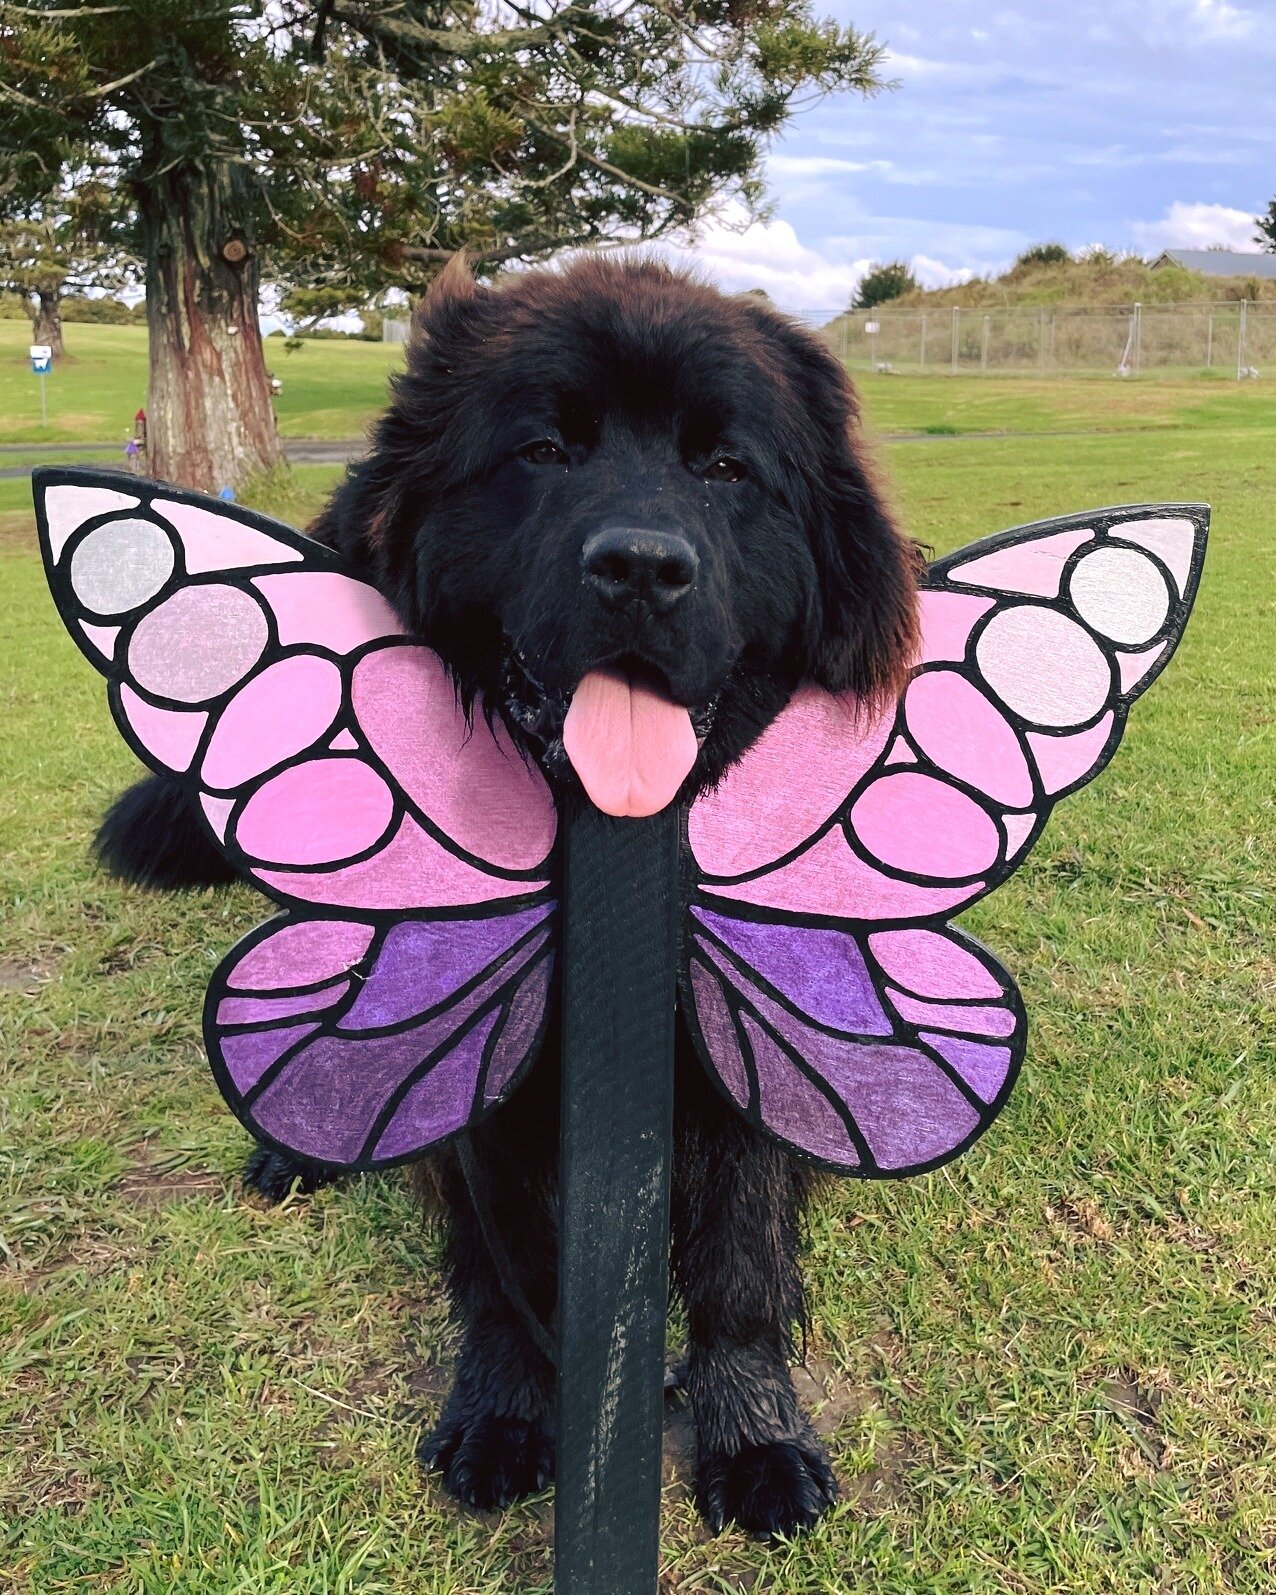 Hellooo, don&rsquo;t mind me! 🐶

Little fairies - don&rsquo;t forget that right next to the big pair of fairy wings, there&rsquo;s also a mini pair to pose with 🦋! Purple on one side&hellip;Rainbow on the other 🌈💜

#fairyworks #hobsonvillefairies